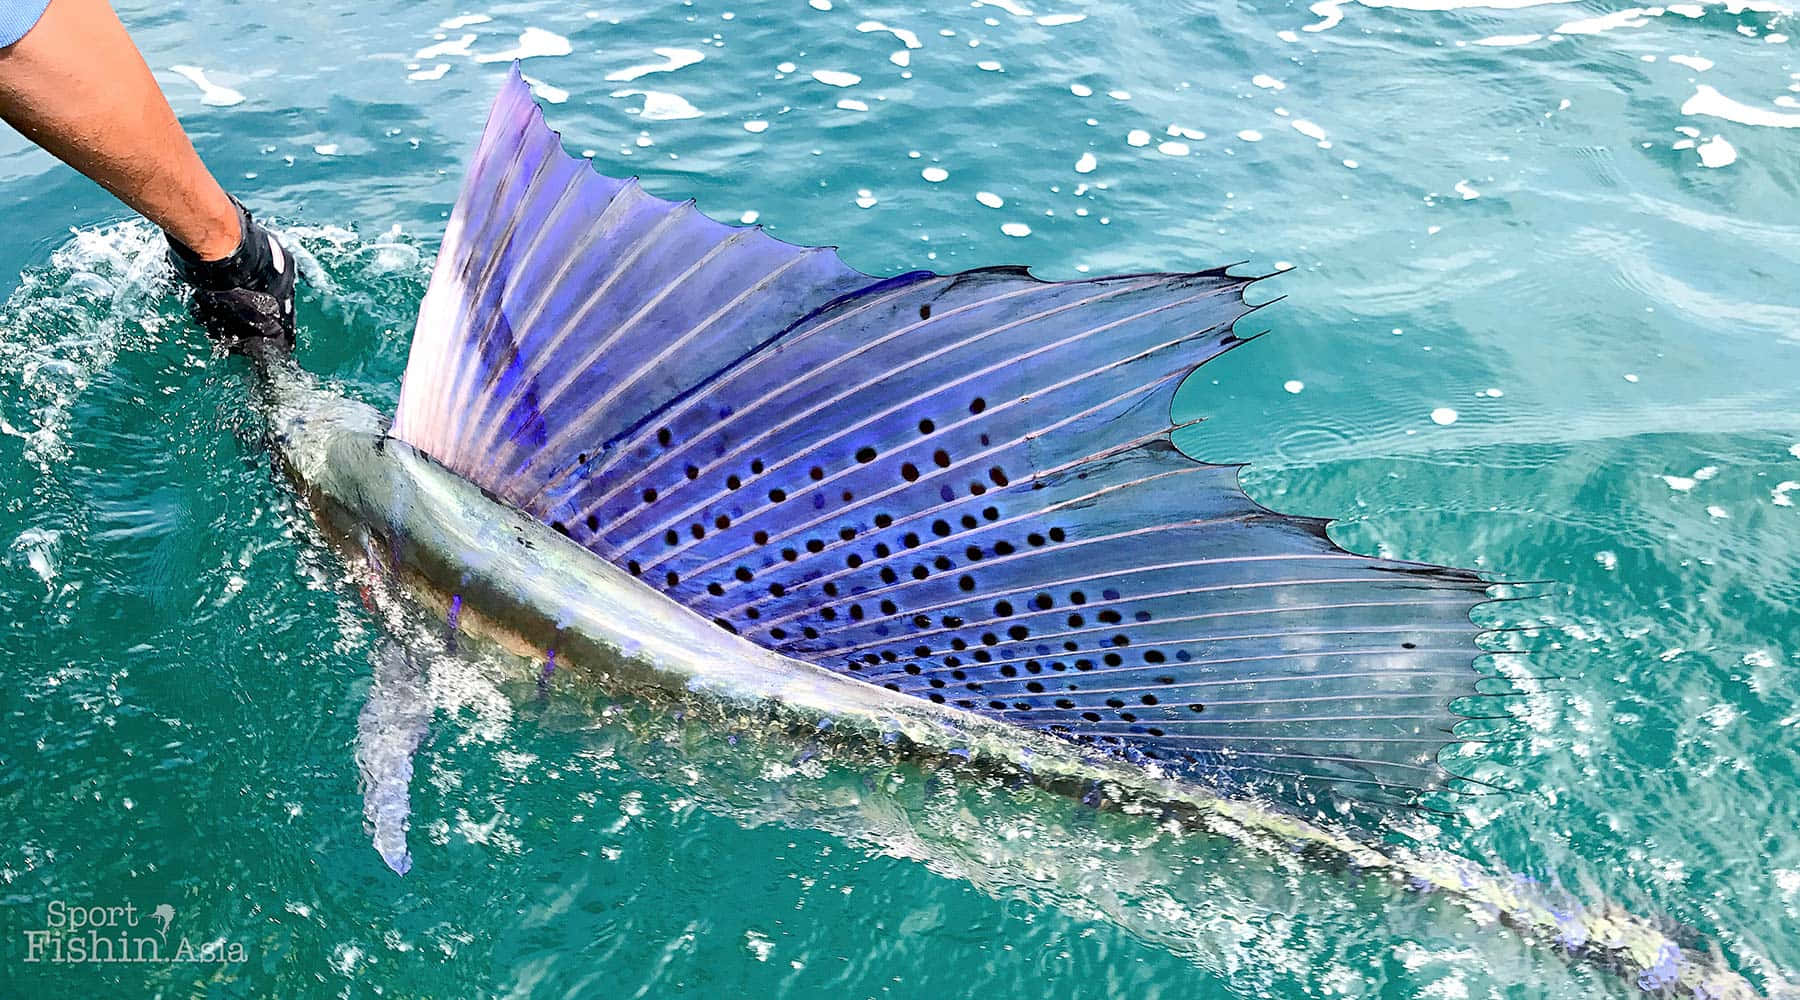 A sailfish leaping out of the blue waters of the Caribbean